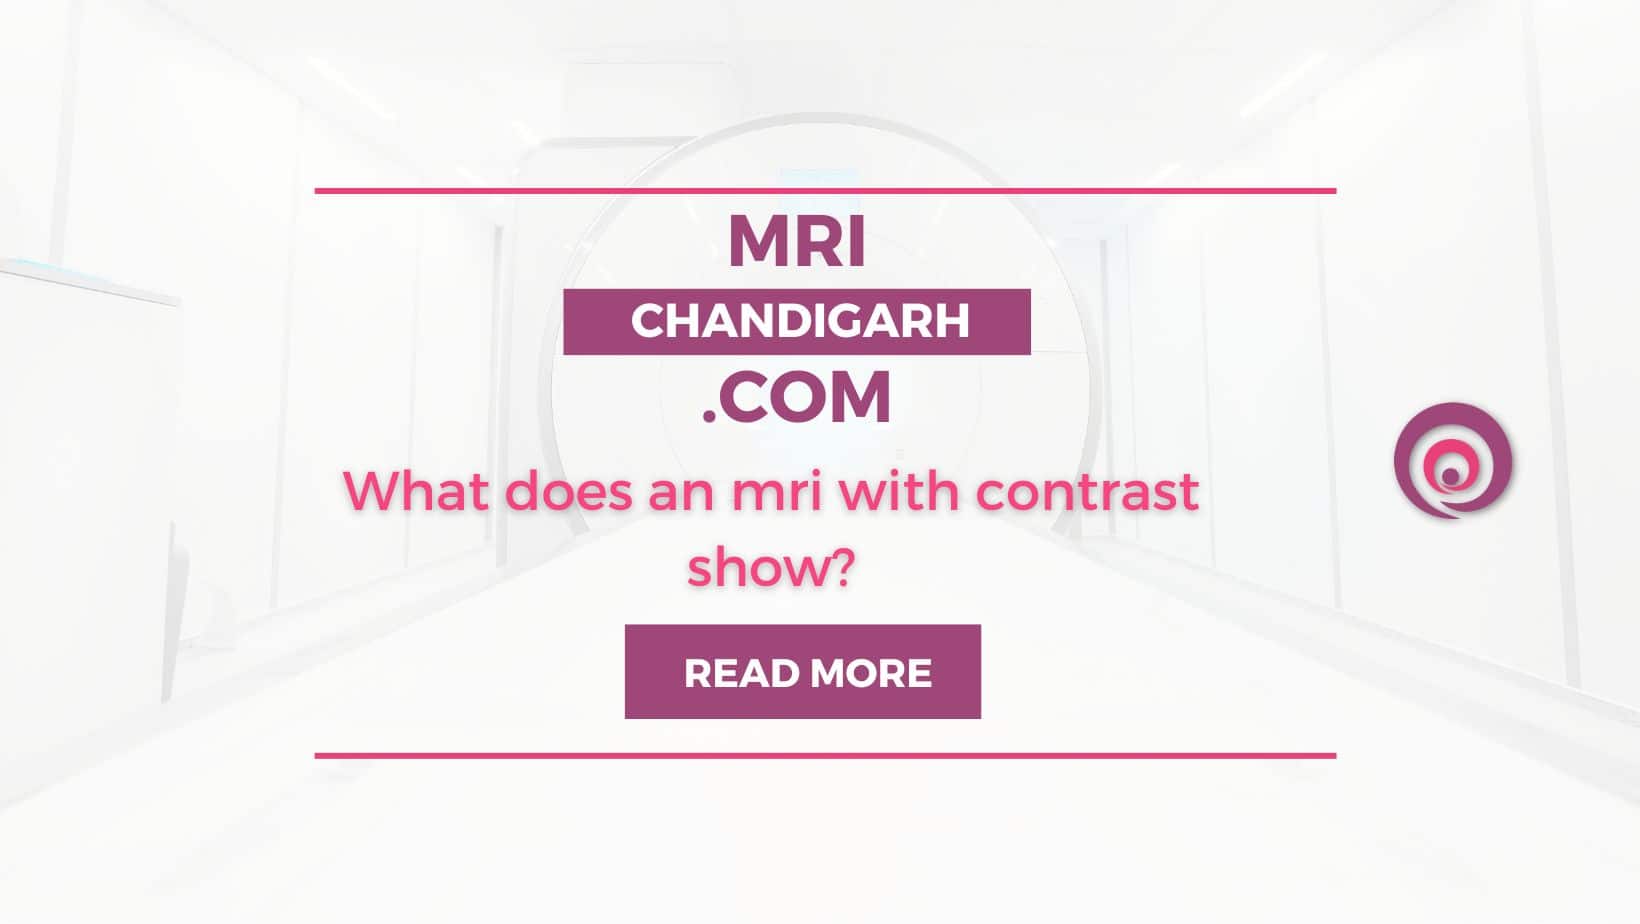 What does an mri with contrast show?